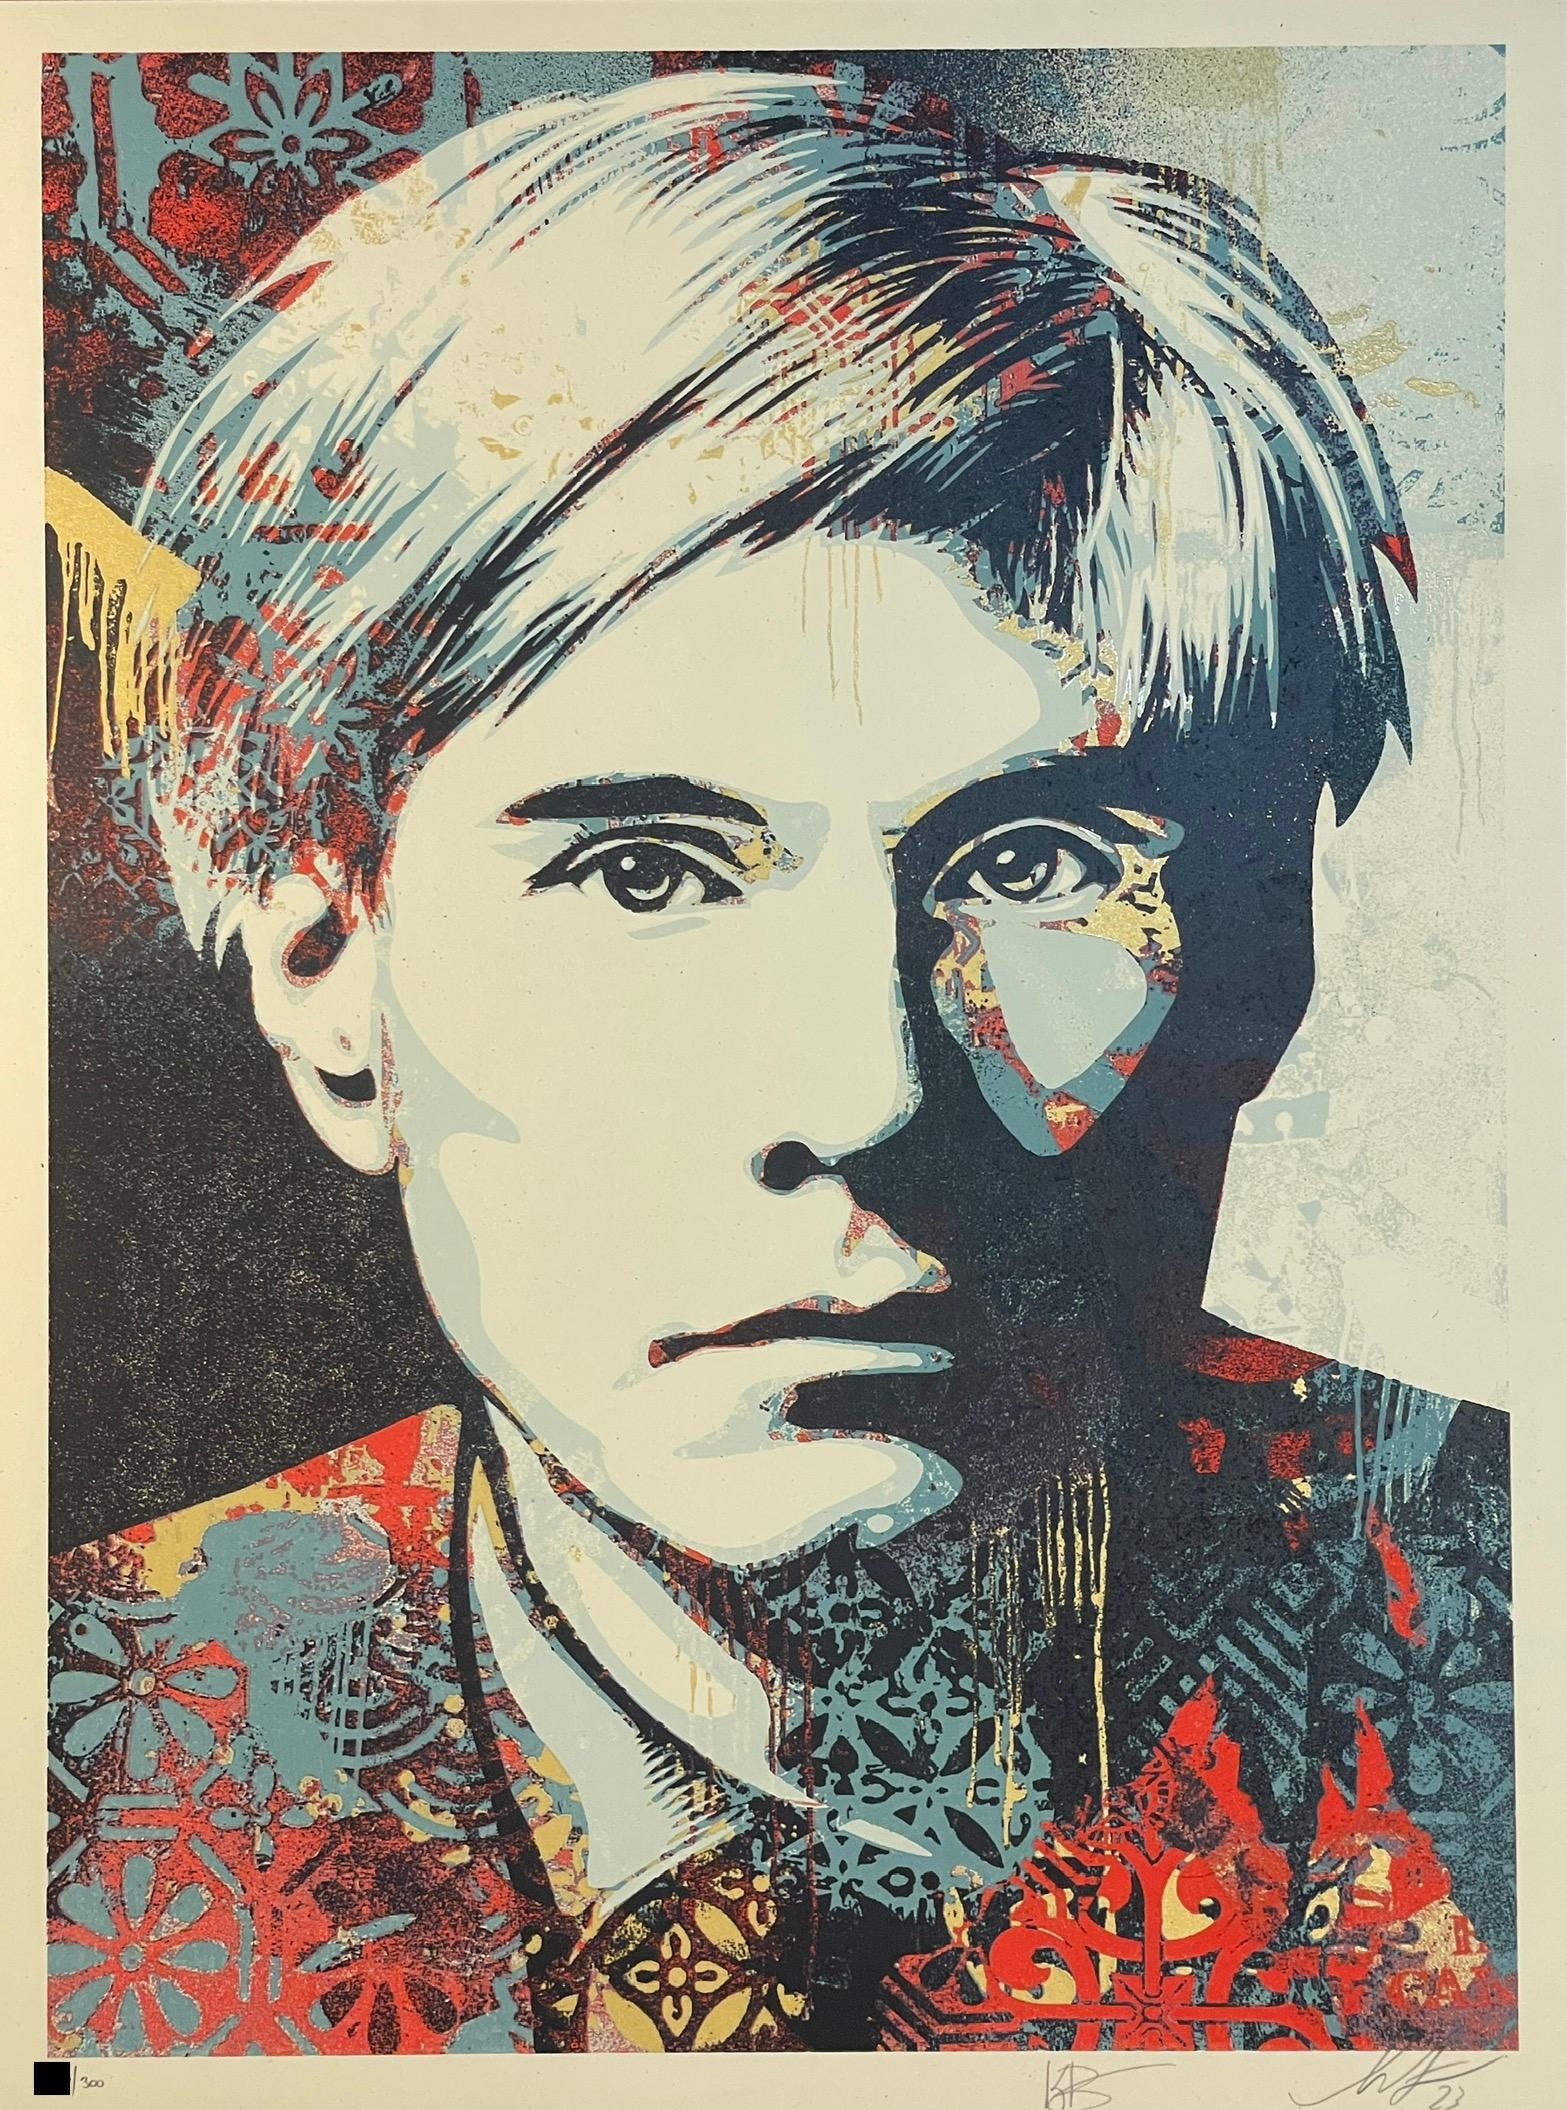 Original Illustration based on photograph by Karen Bystedt. Signed by Shepard Fairey and Karen Bystedt.

Comes with C.O.A. from New Union Gallery.

"I’ve been a fan of Andy Warhol’s art since high school. At first, his works’ iconic nature and